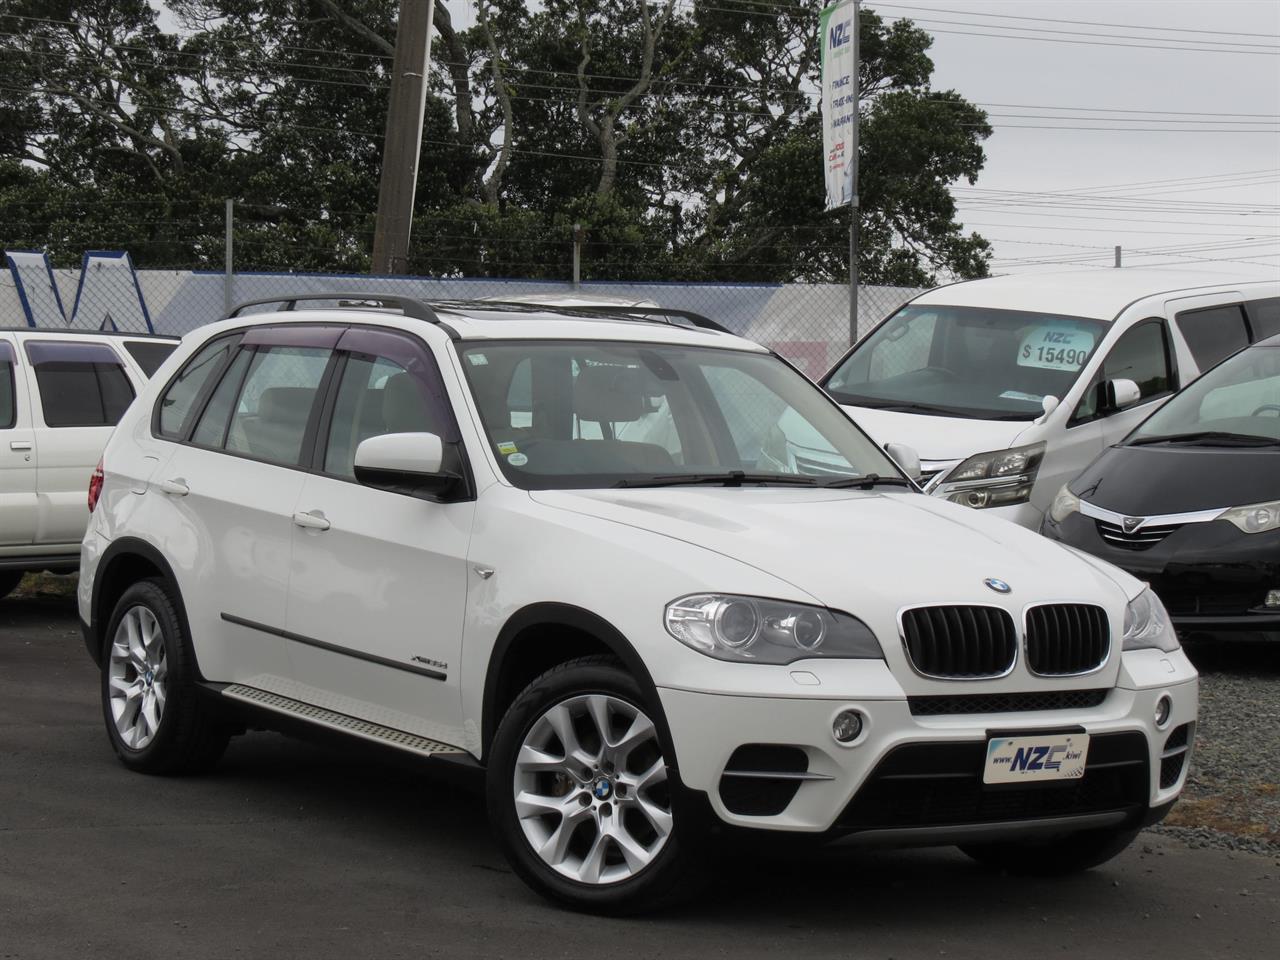 NZC best hot price for 2012 BMW X5 in Auckland